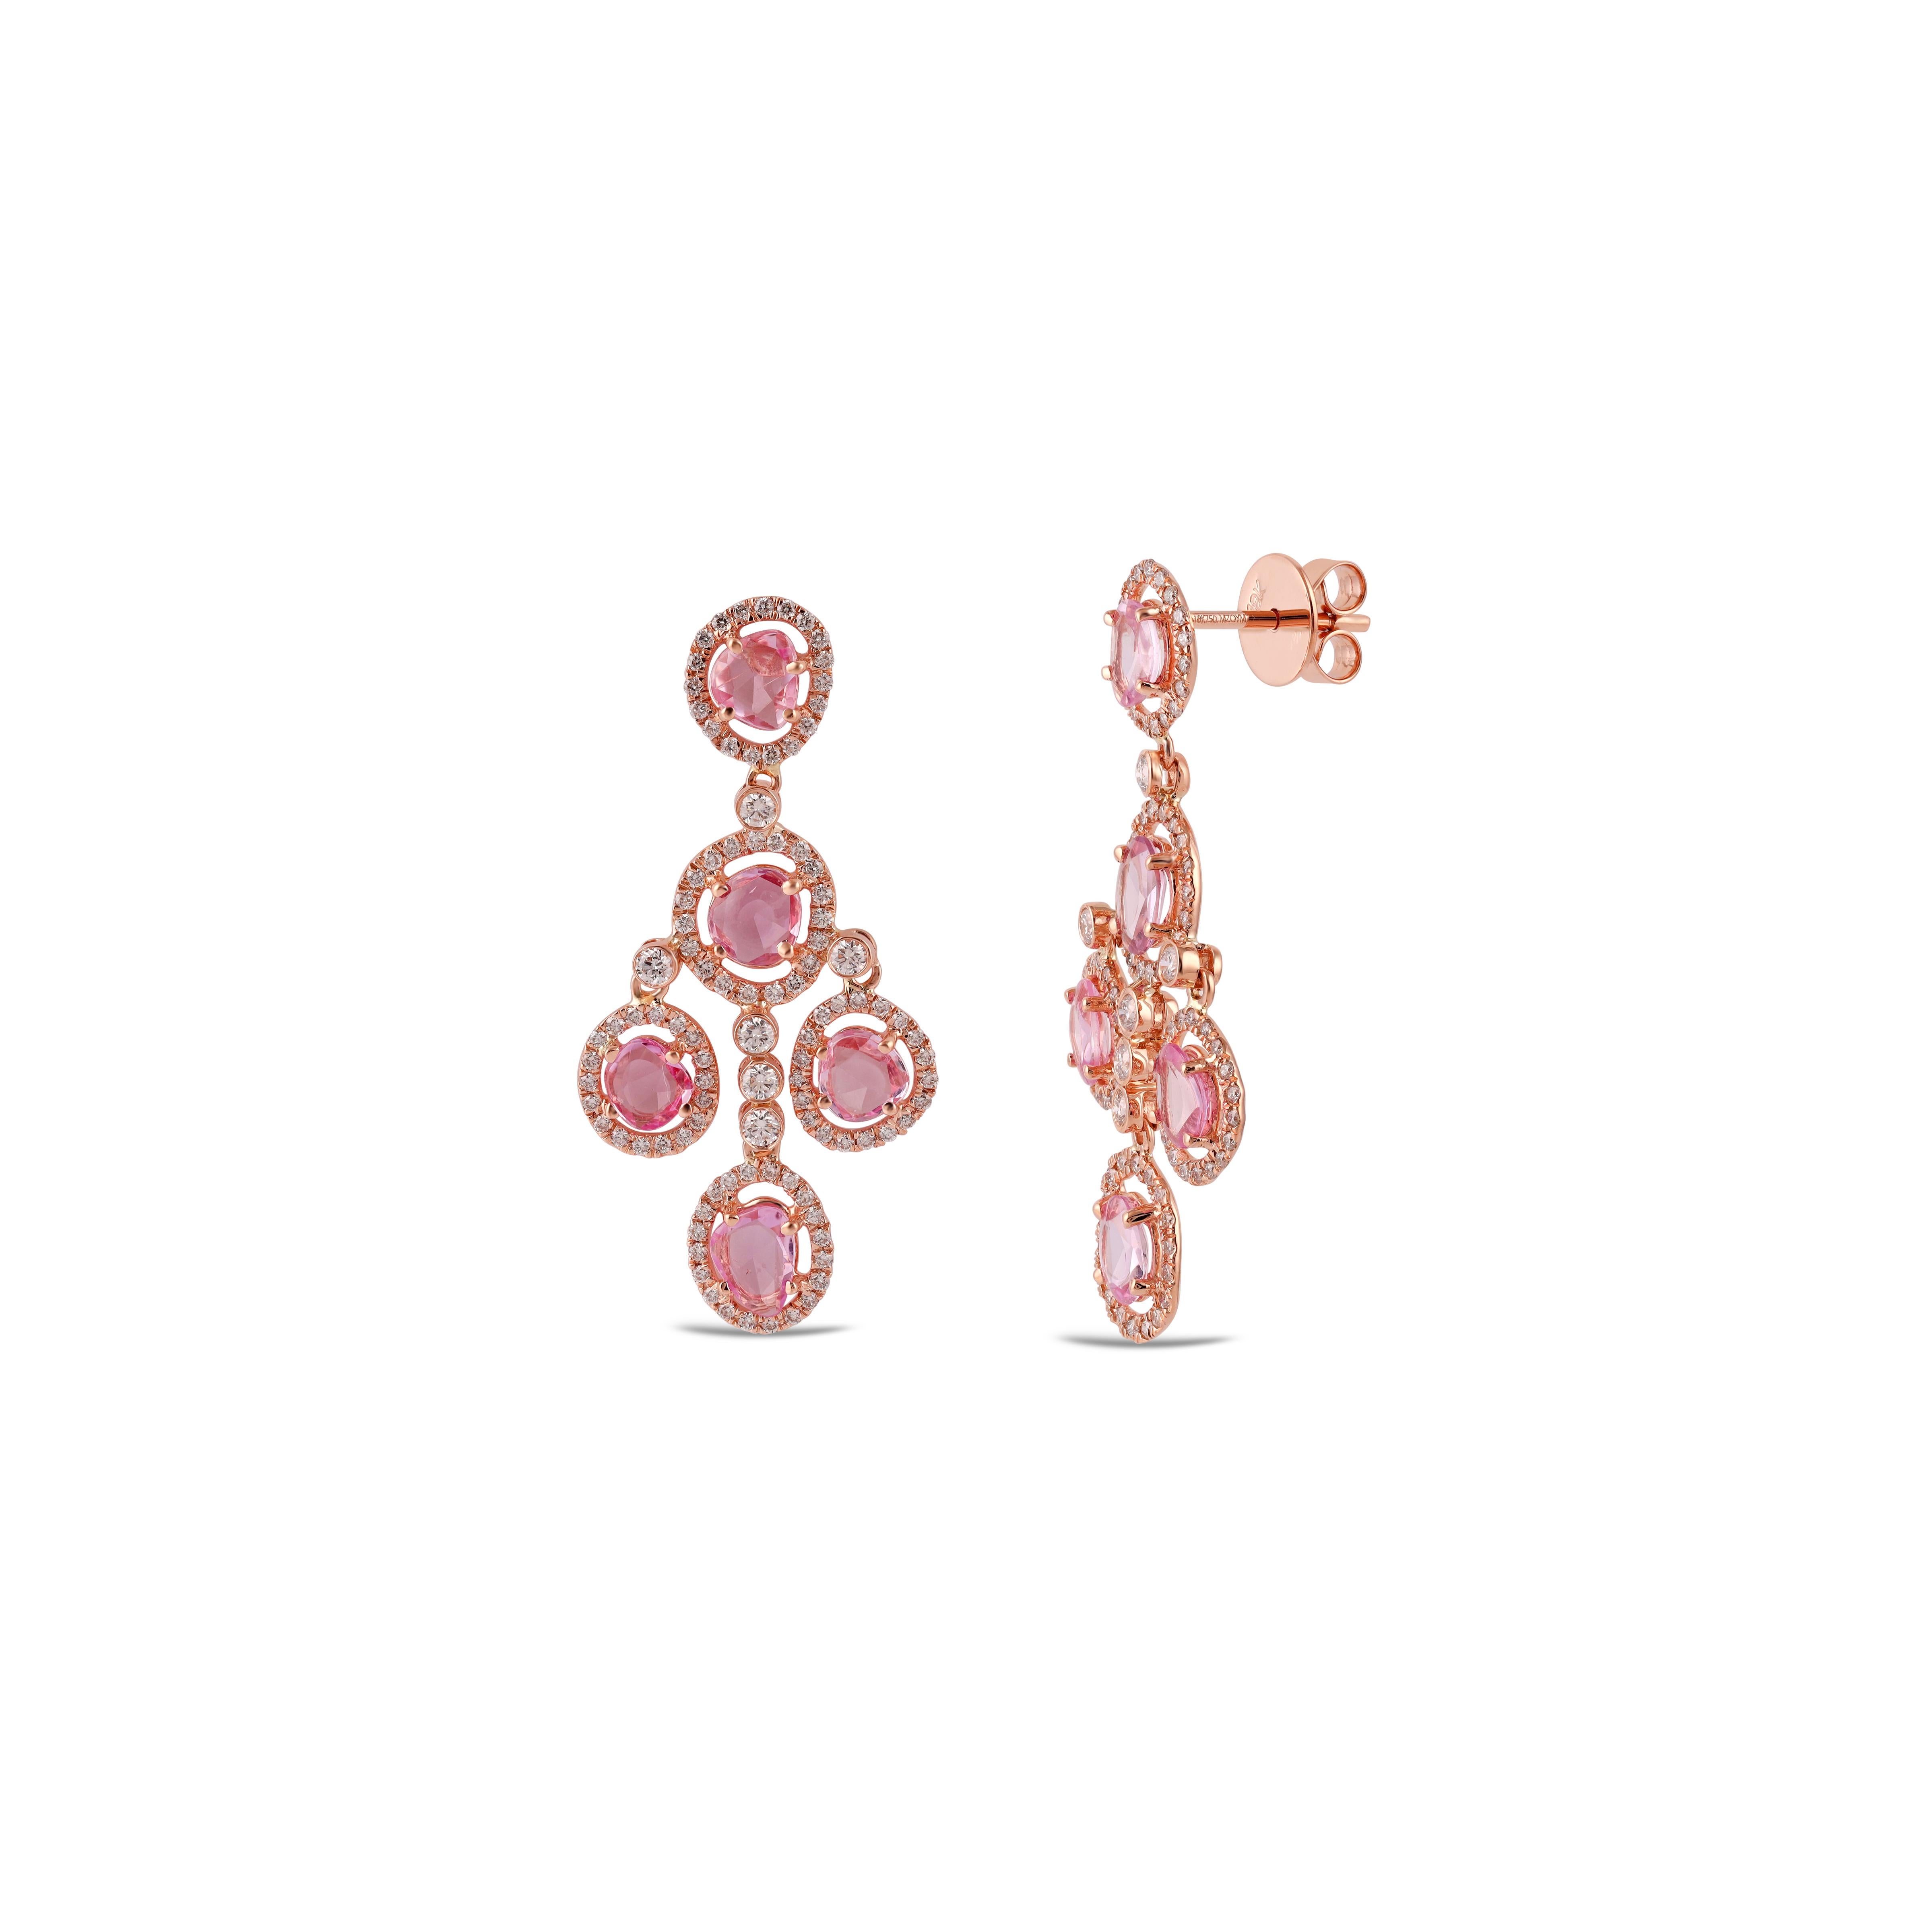 Contemporary 4.23 Carat Pink Sapphire & Diamond Earrings Studded in 18 Karat Rose Gold For Sale